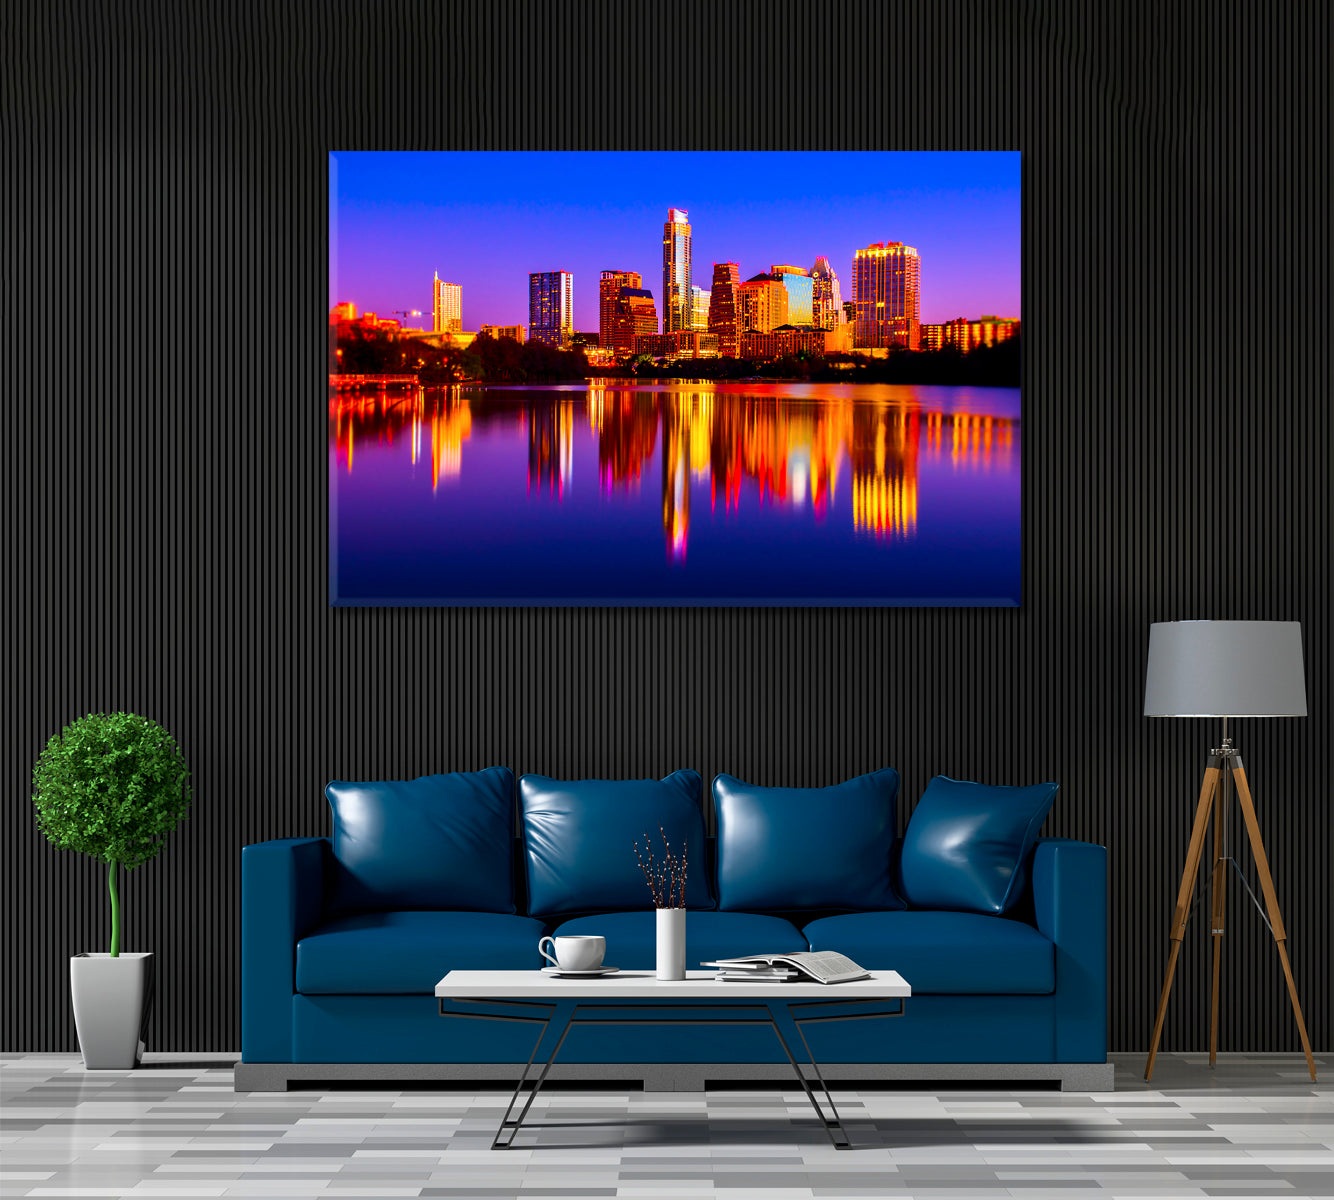 Reflections Of City Lights At Night Austin Texas Canvas Print ArtLexy 1 Panel 24"x16" inches 